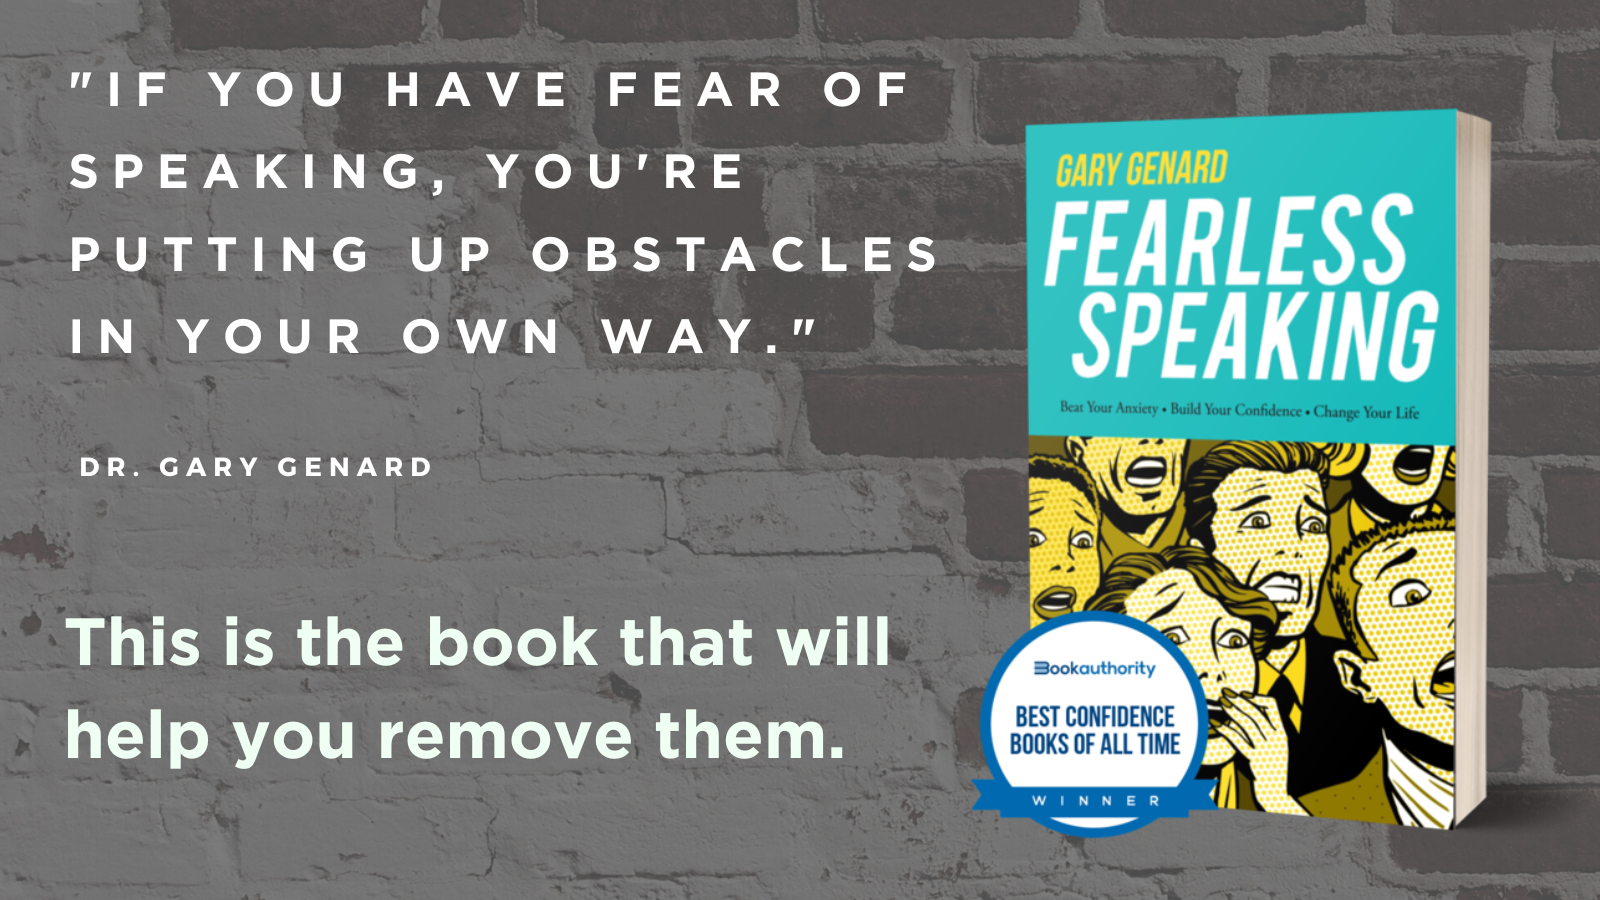 Get the book named One of the 100 Best Confidence Books of All Time, Dr. Gary Genard's Fearless Speaking.